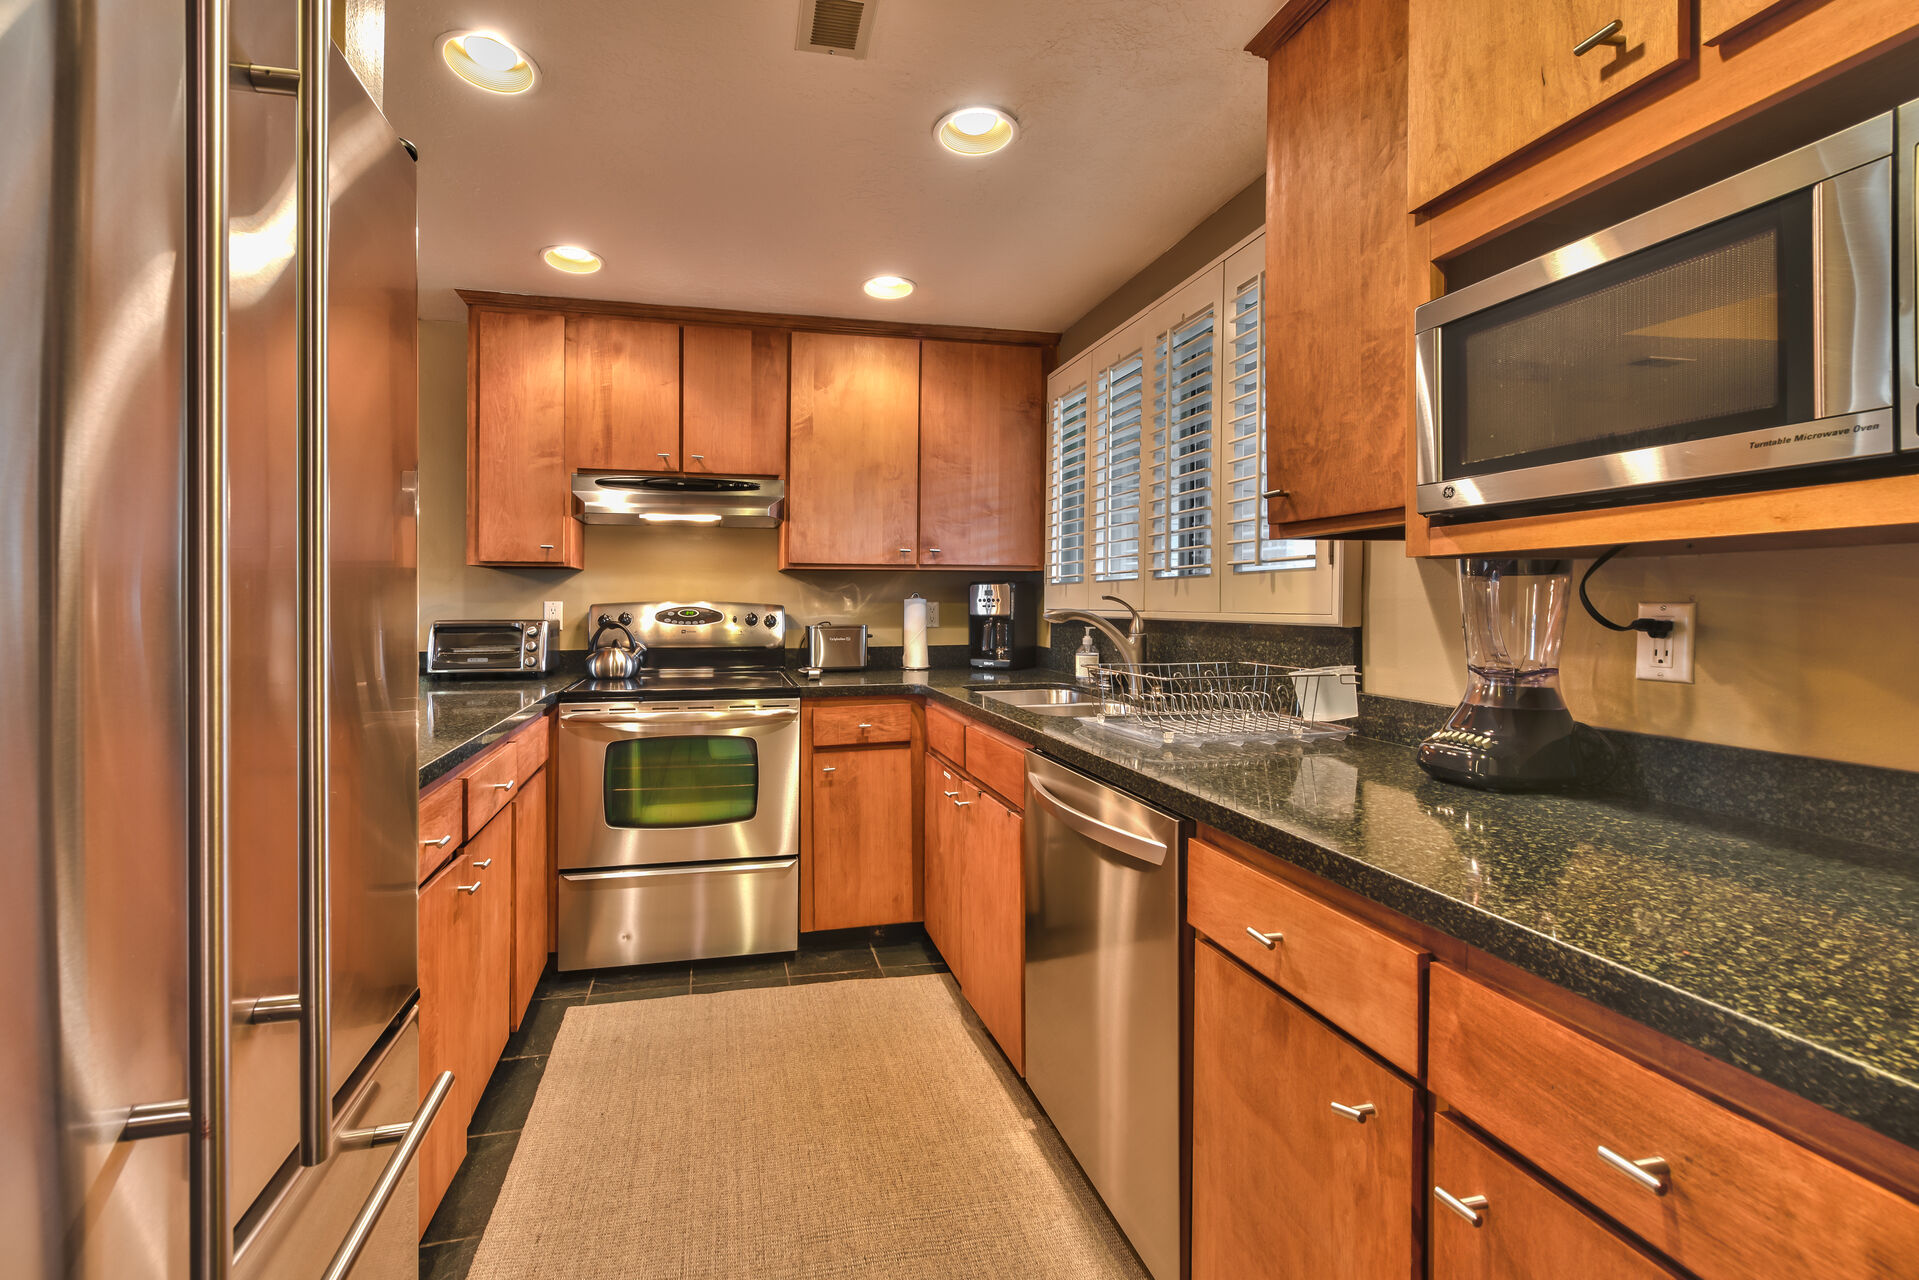 Fully-Equipped Kitchen with Granite Counters and Stainless Steel Appliances including a Jennair Refrigerator